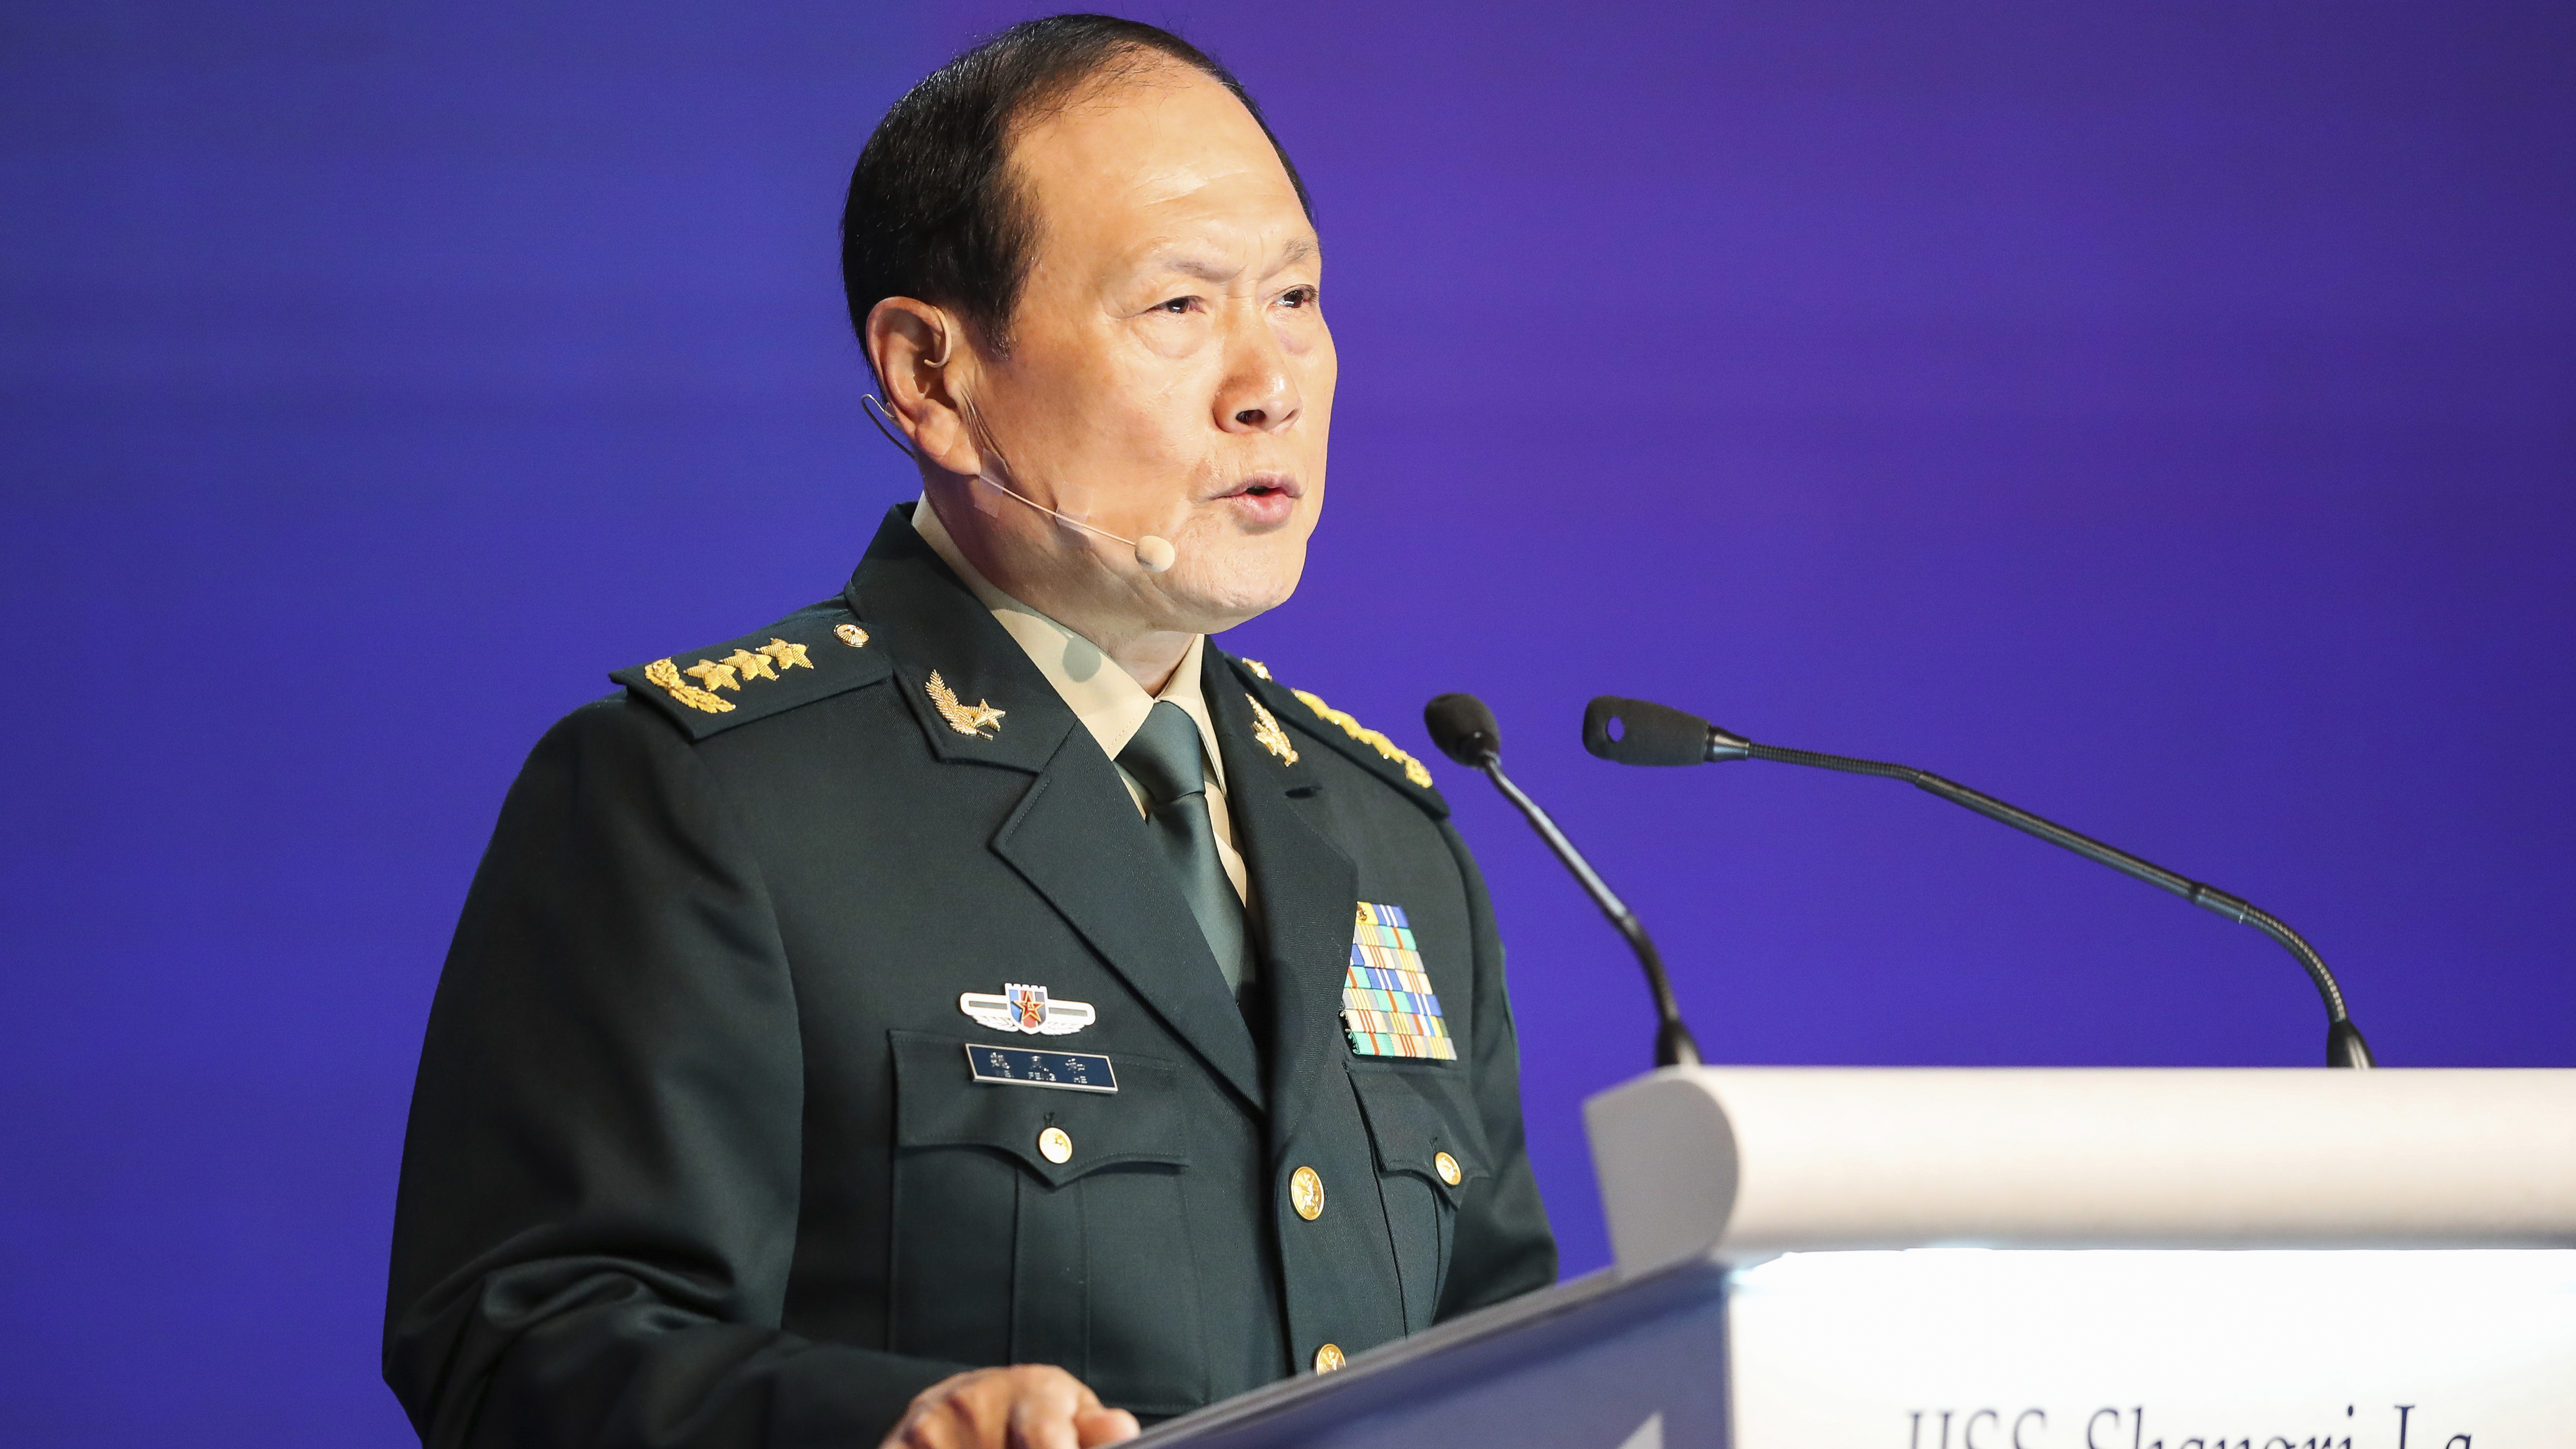 China's Defense Minister General Wei Fenghe speaks at a plenary session during the 19th International Institute for Strategic Studies (IISS) Shangri-la Dialogue, Asia's annual defense and security forum, in Singapore.